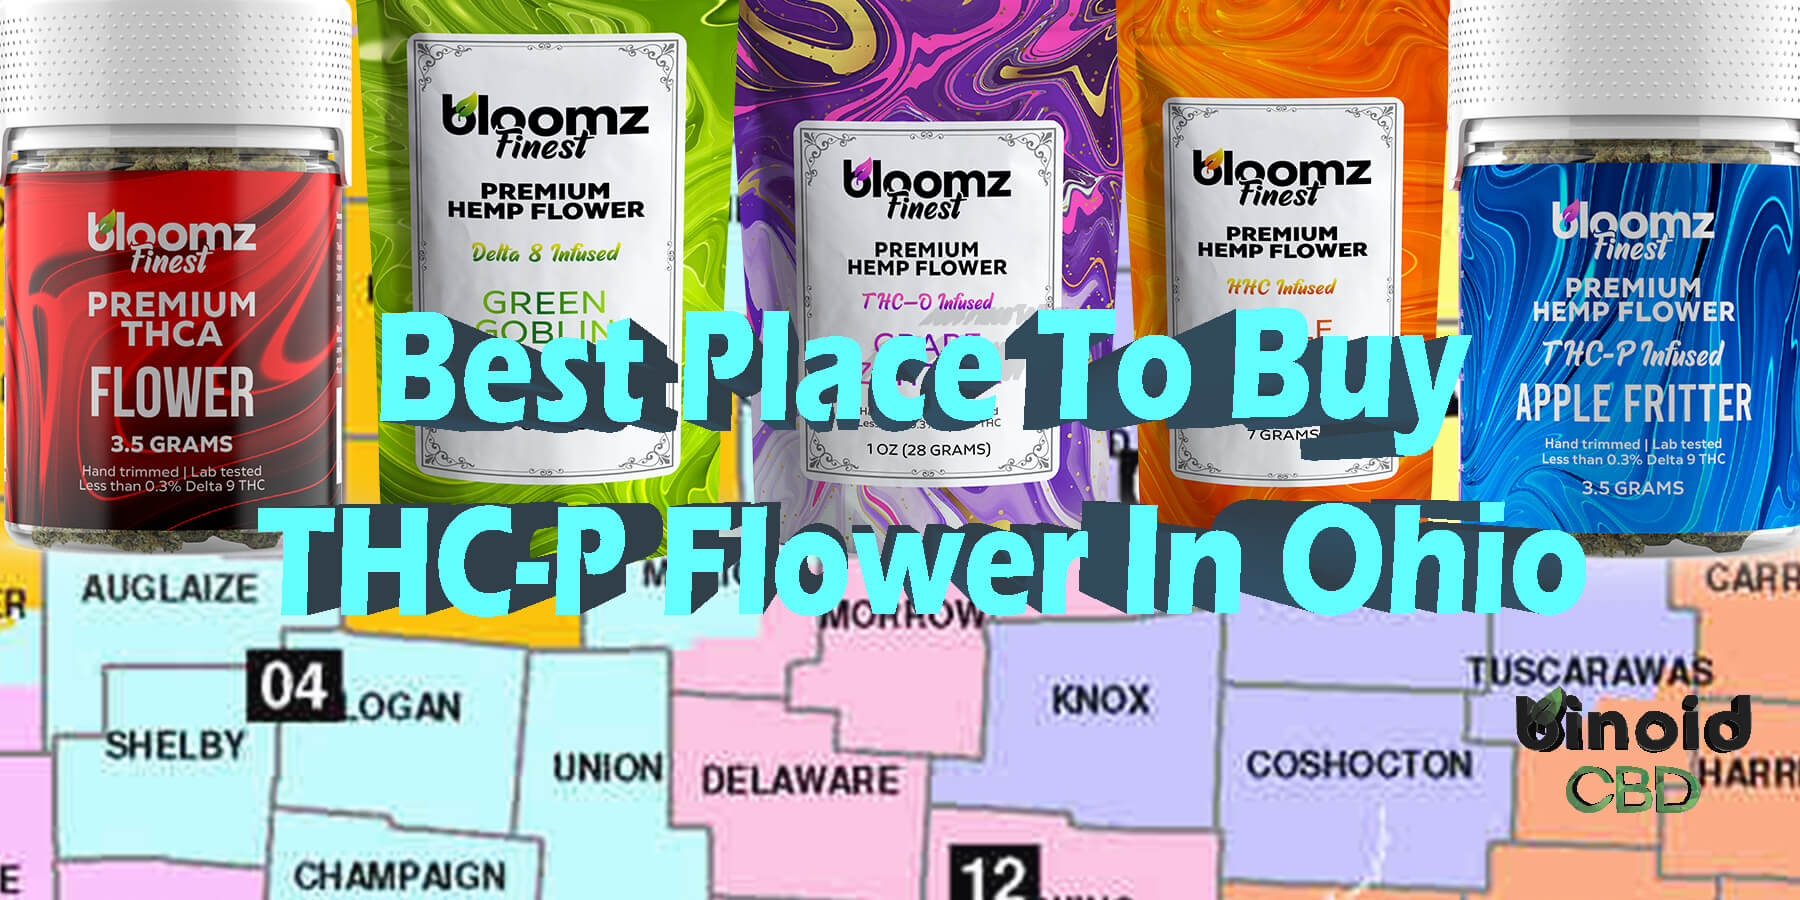 Buy THCP Flower Ohio Get Online Near Me For Sale Best Brand Strongest Real Legal Store Shop Reddit